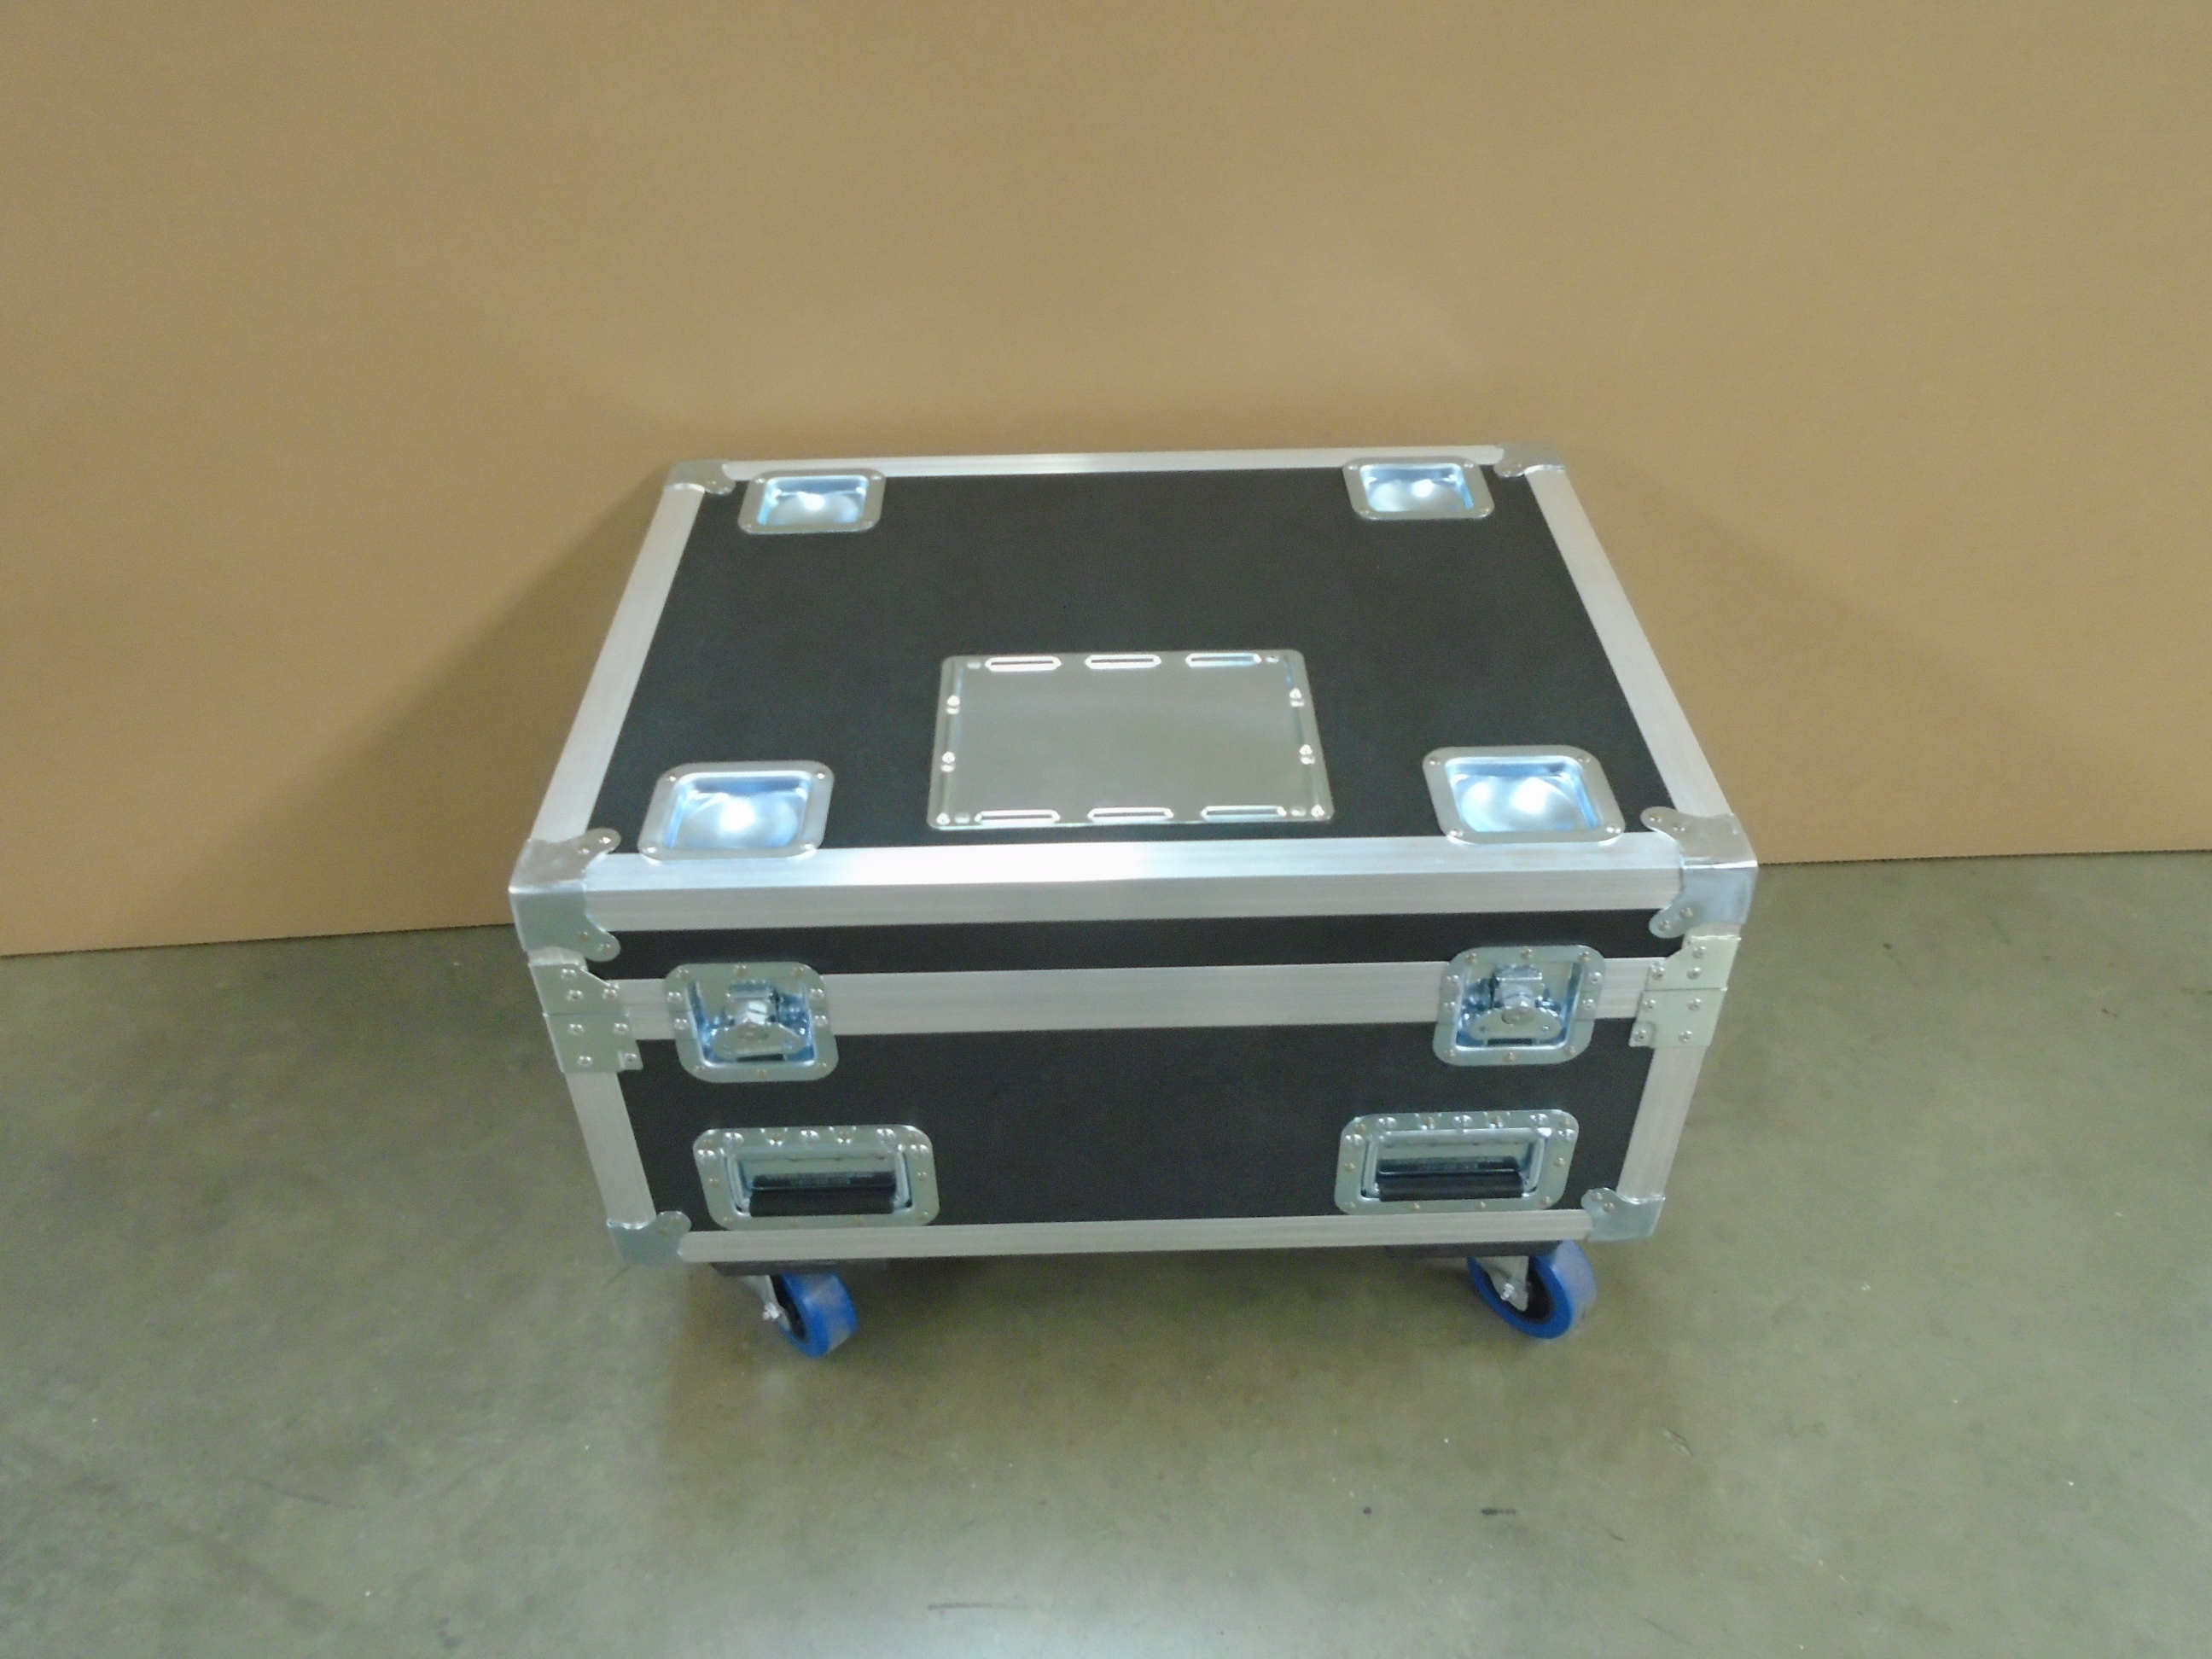 Print # 9101 - Custom Road Case for Panasonic PT-MZ13KU 3LCD Solid Shine Laser Projector By Nelson Case Corp